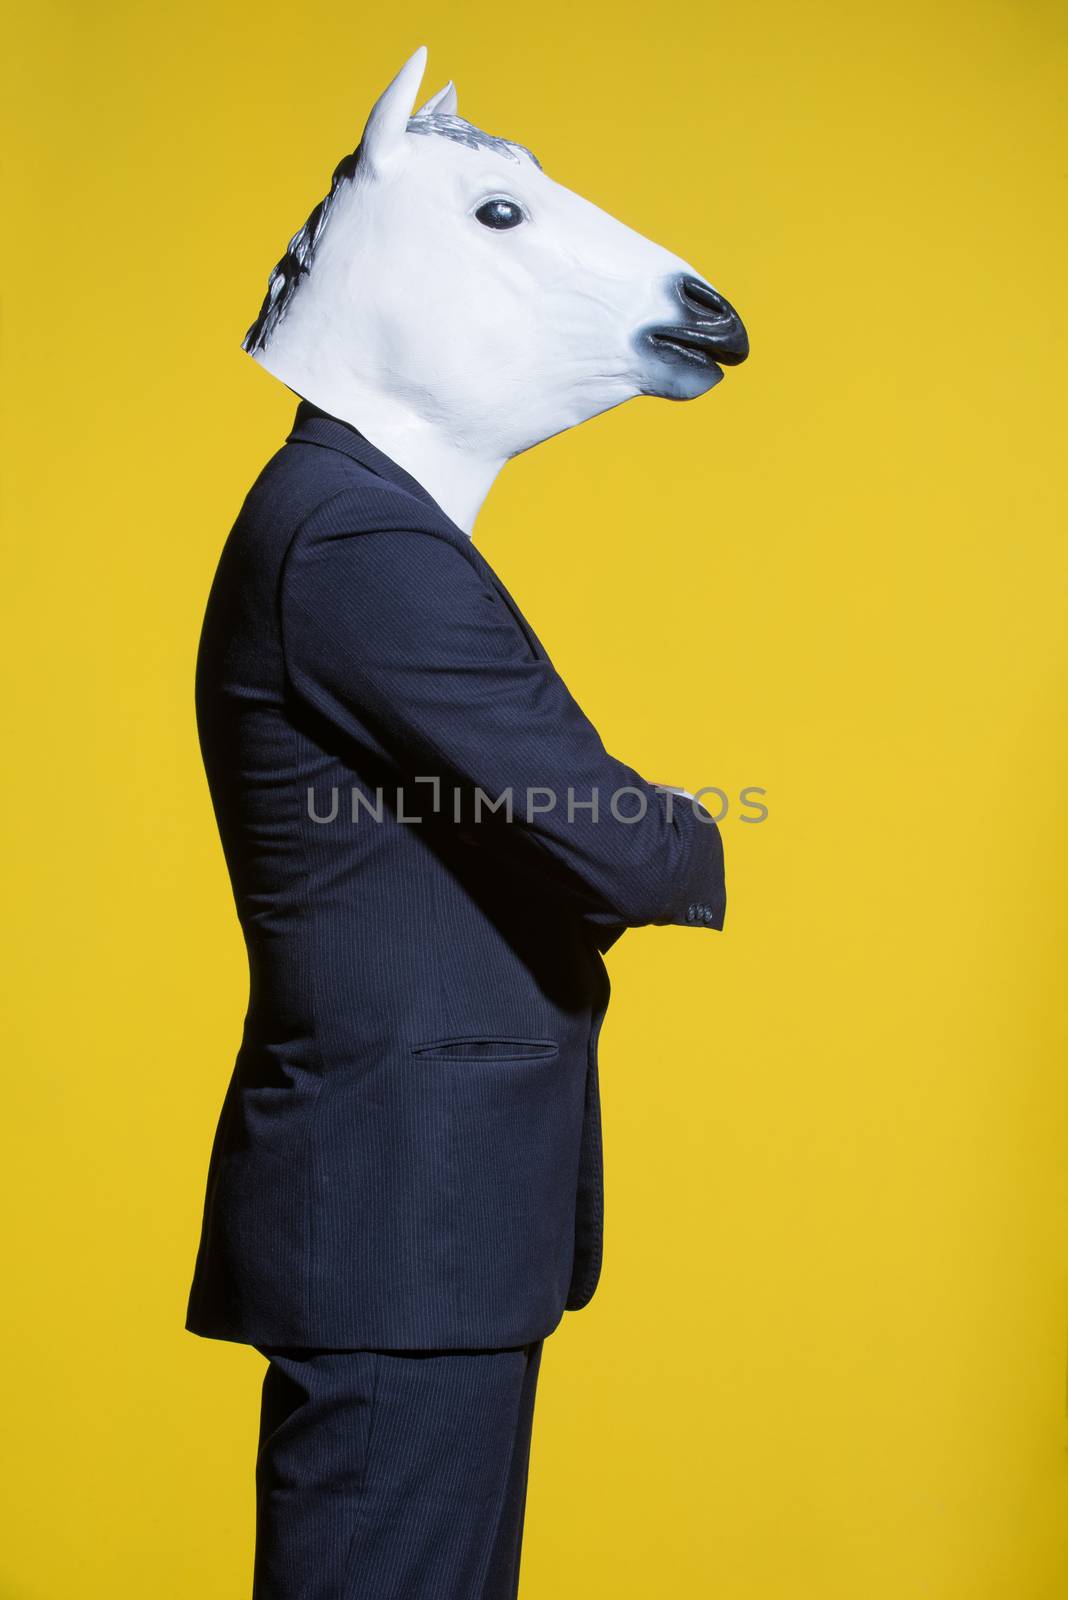 man with horse mask on yellow background by A_Karim